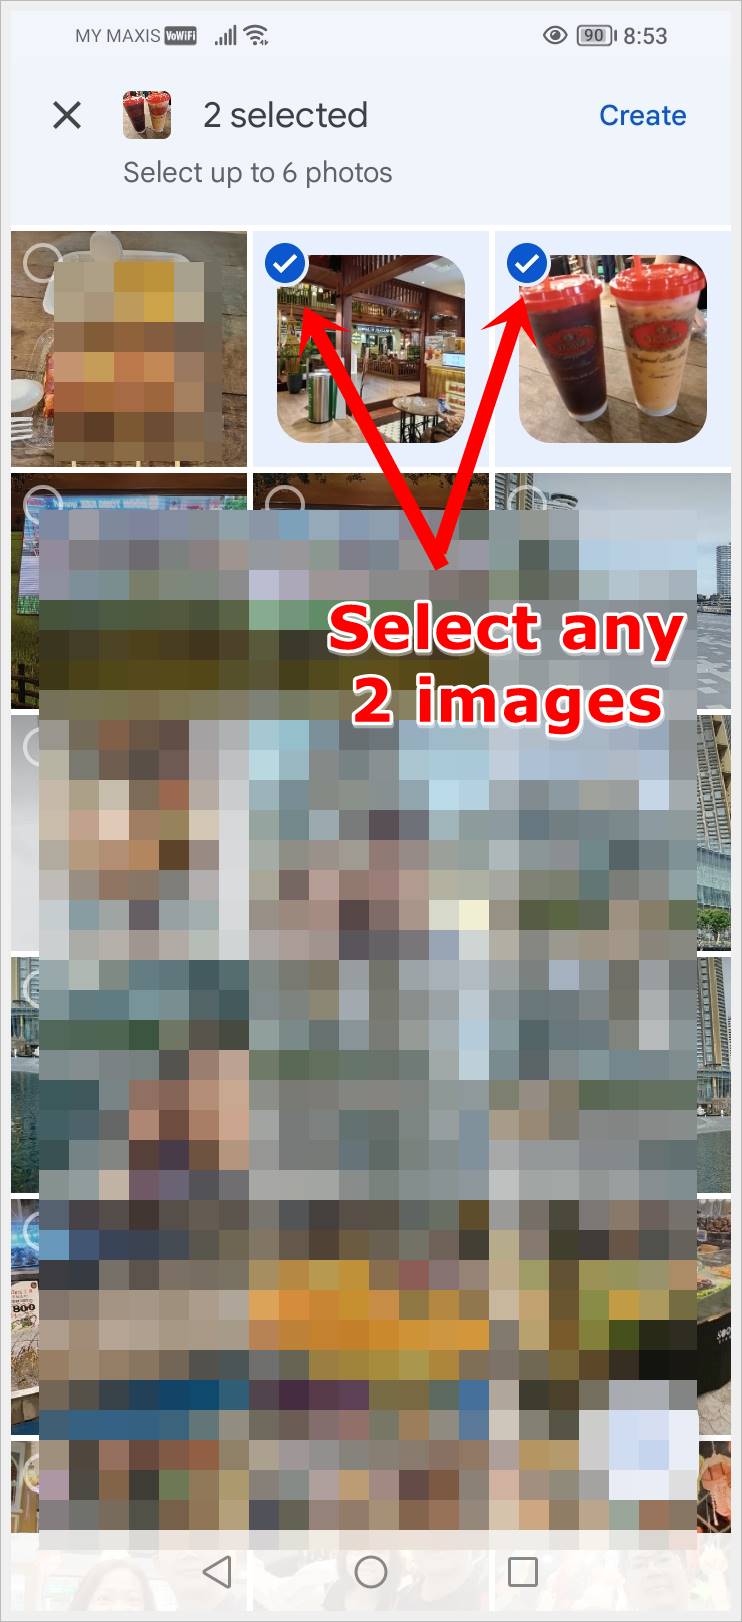 This image shows a screenshot of some of the photos saved in Google Photos. Two specific photos are selected to be merged.